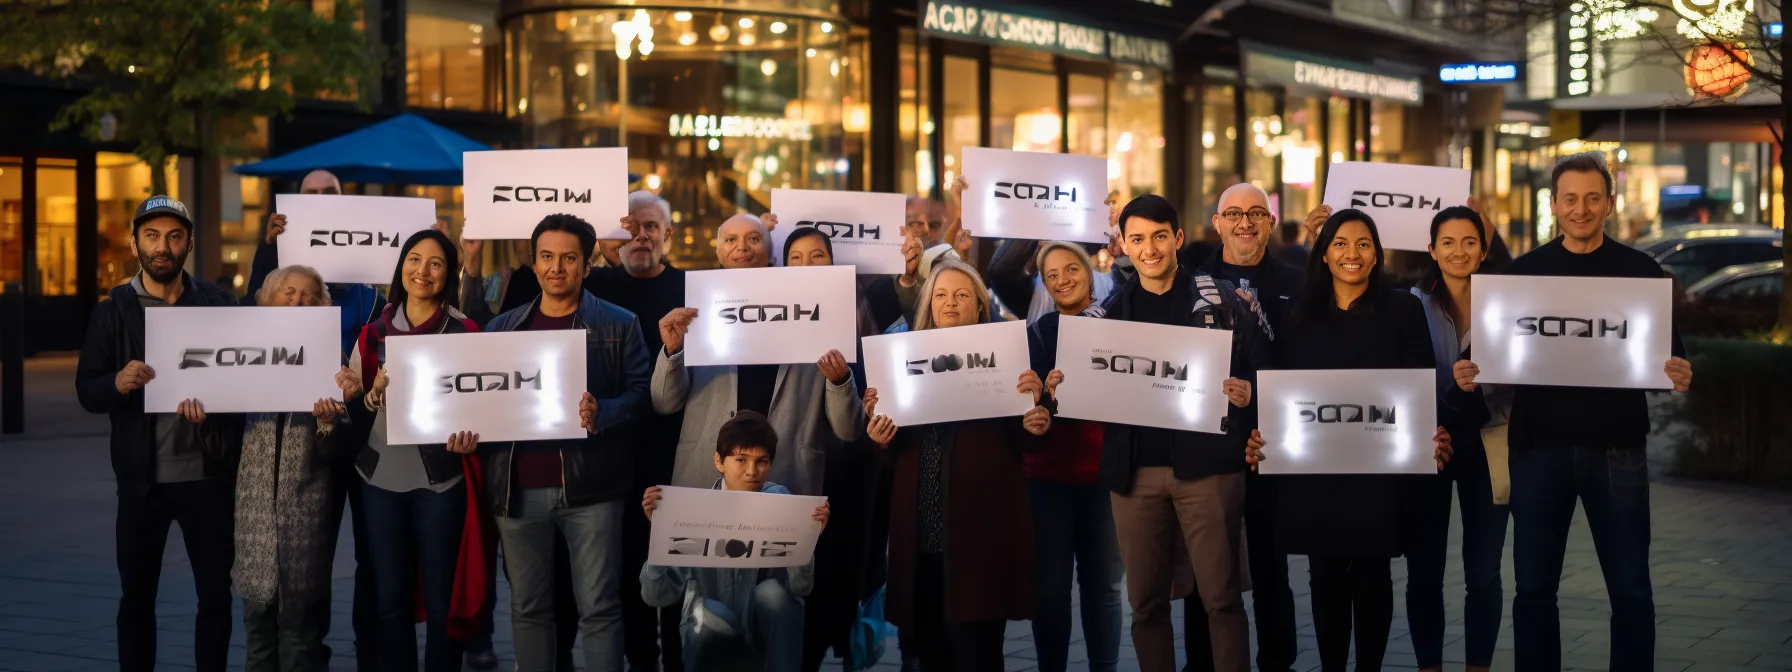 a group of people at a community event holding signs promoting a local online store.